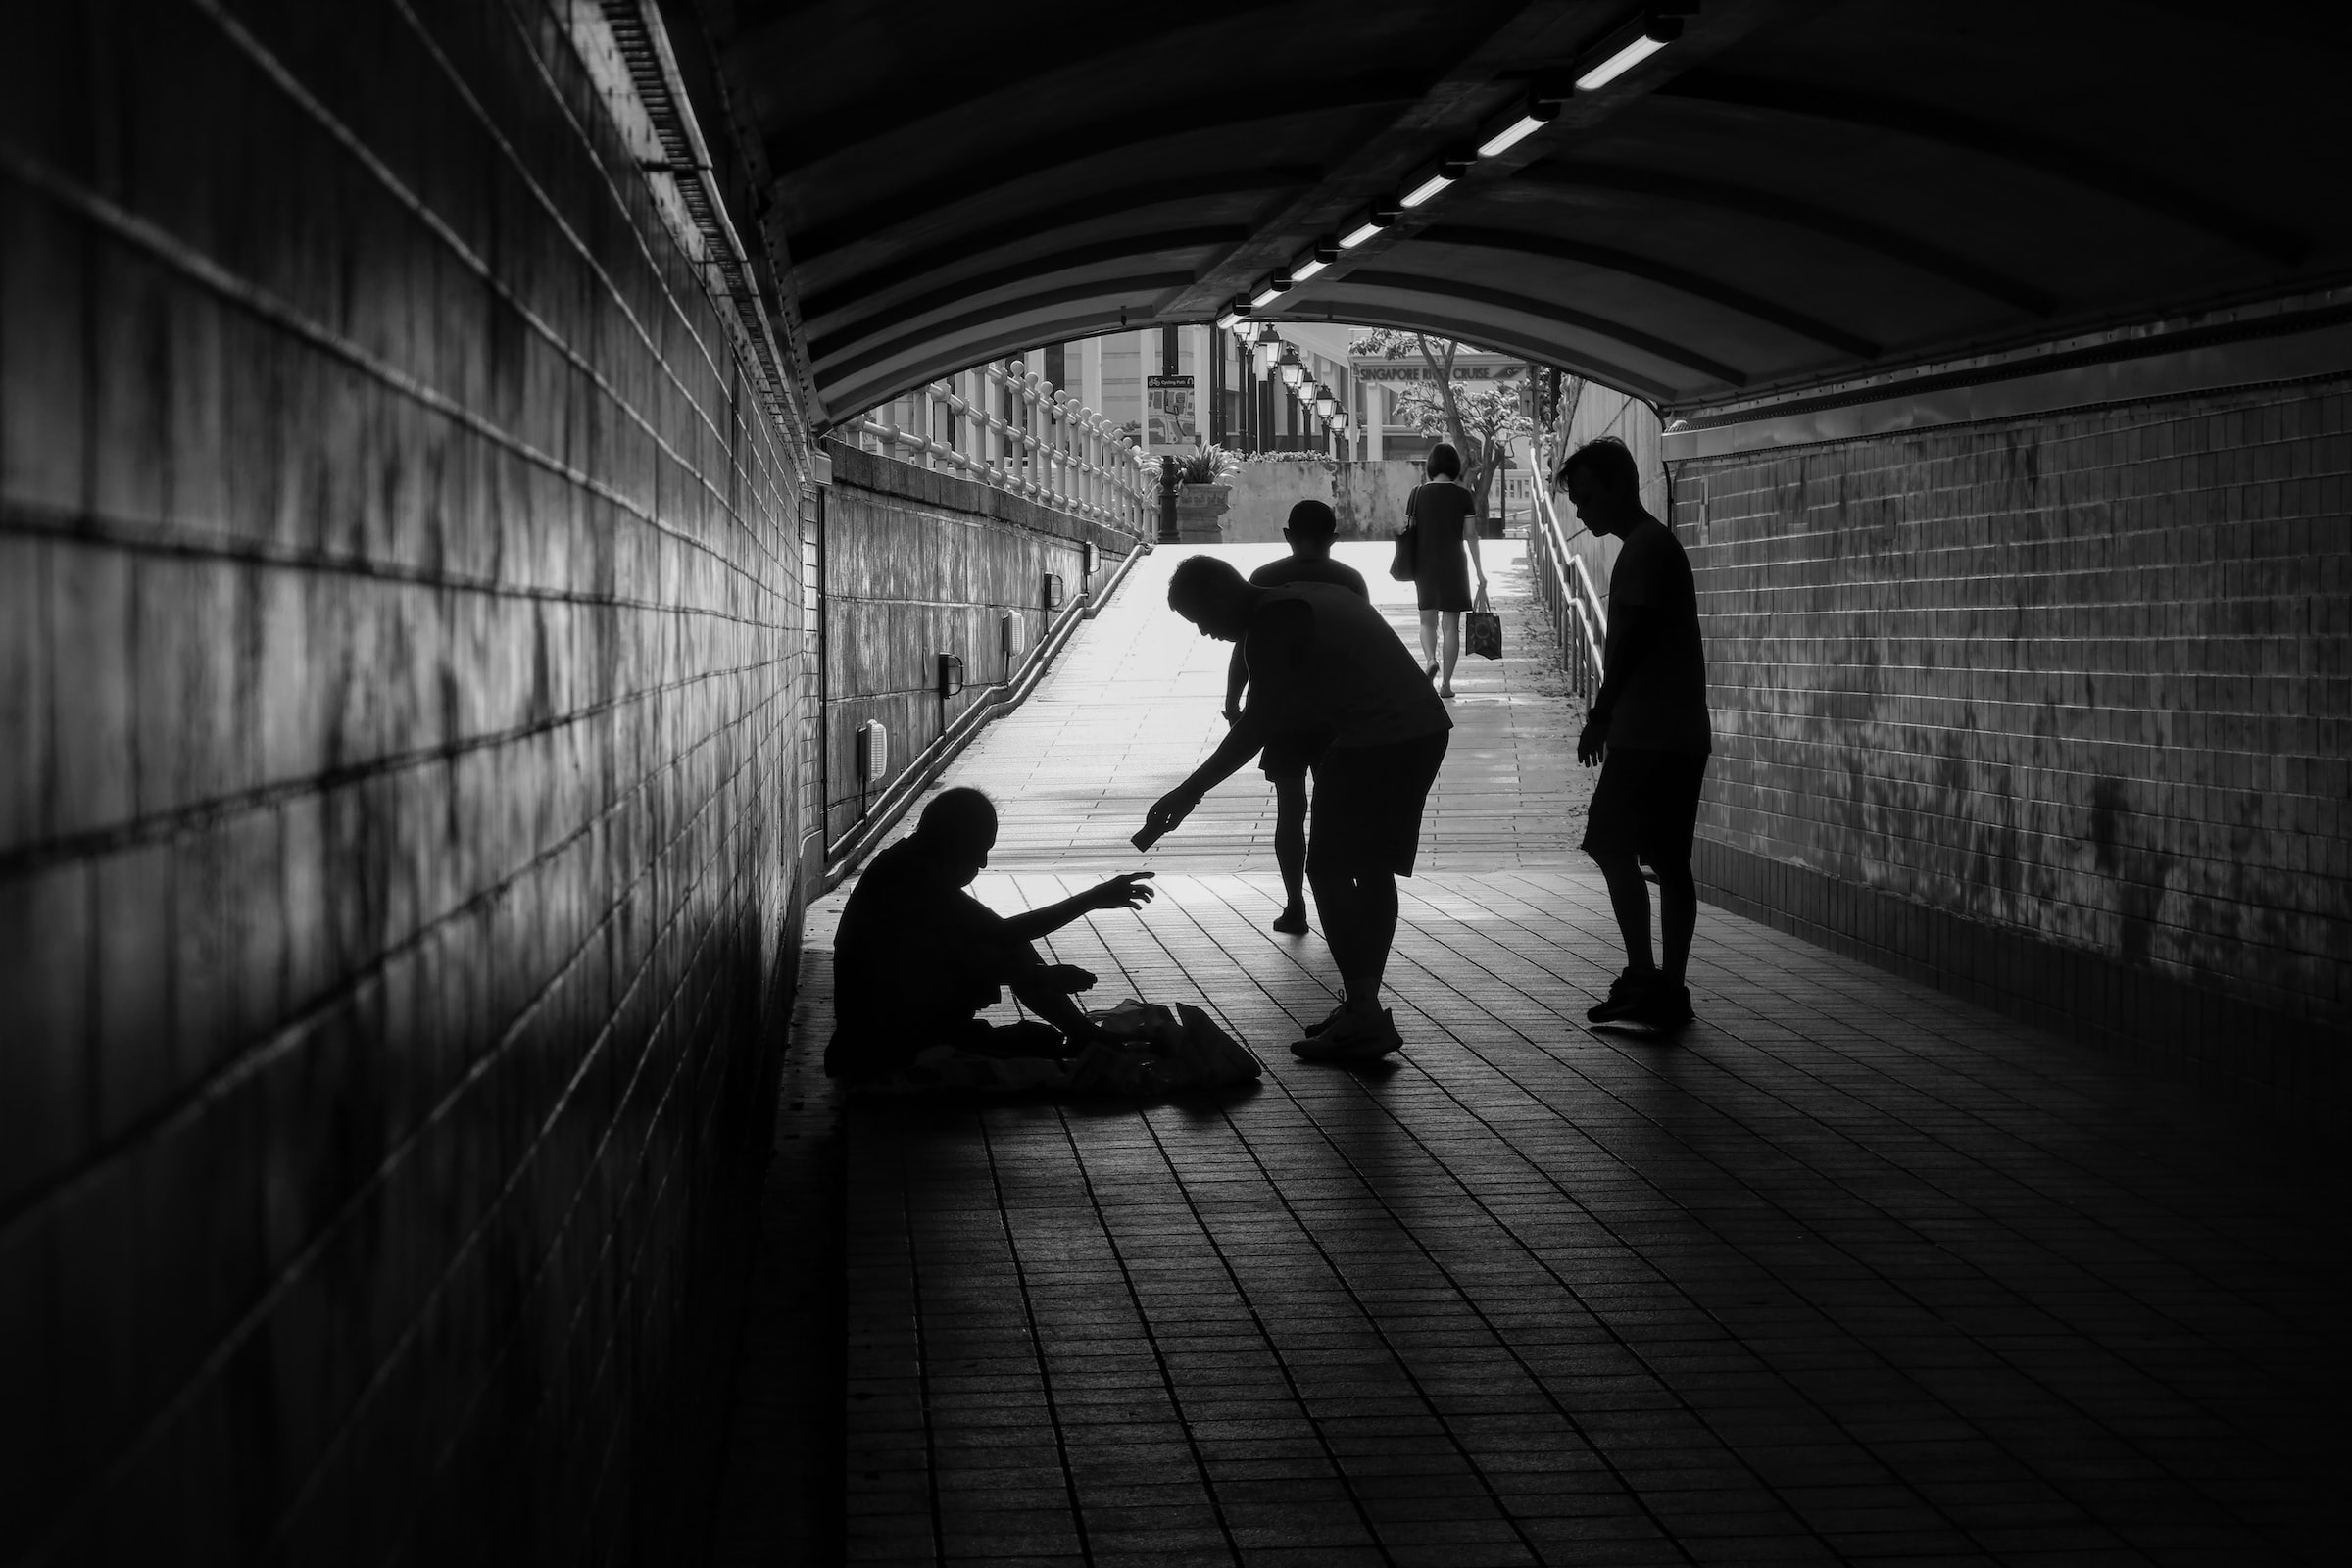 Beggar in underpass receiving money from passers-by